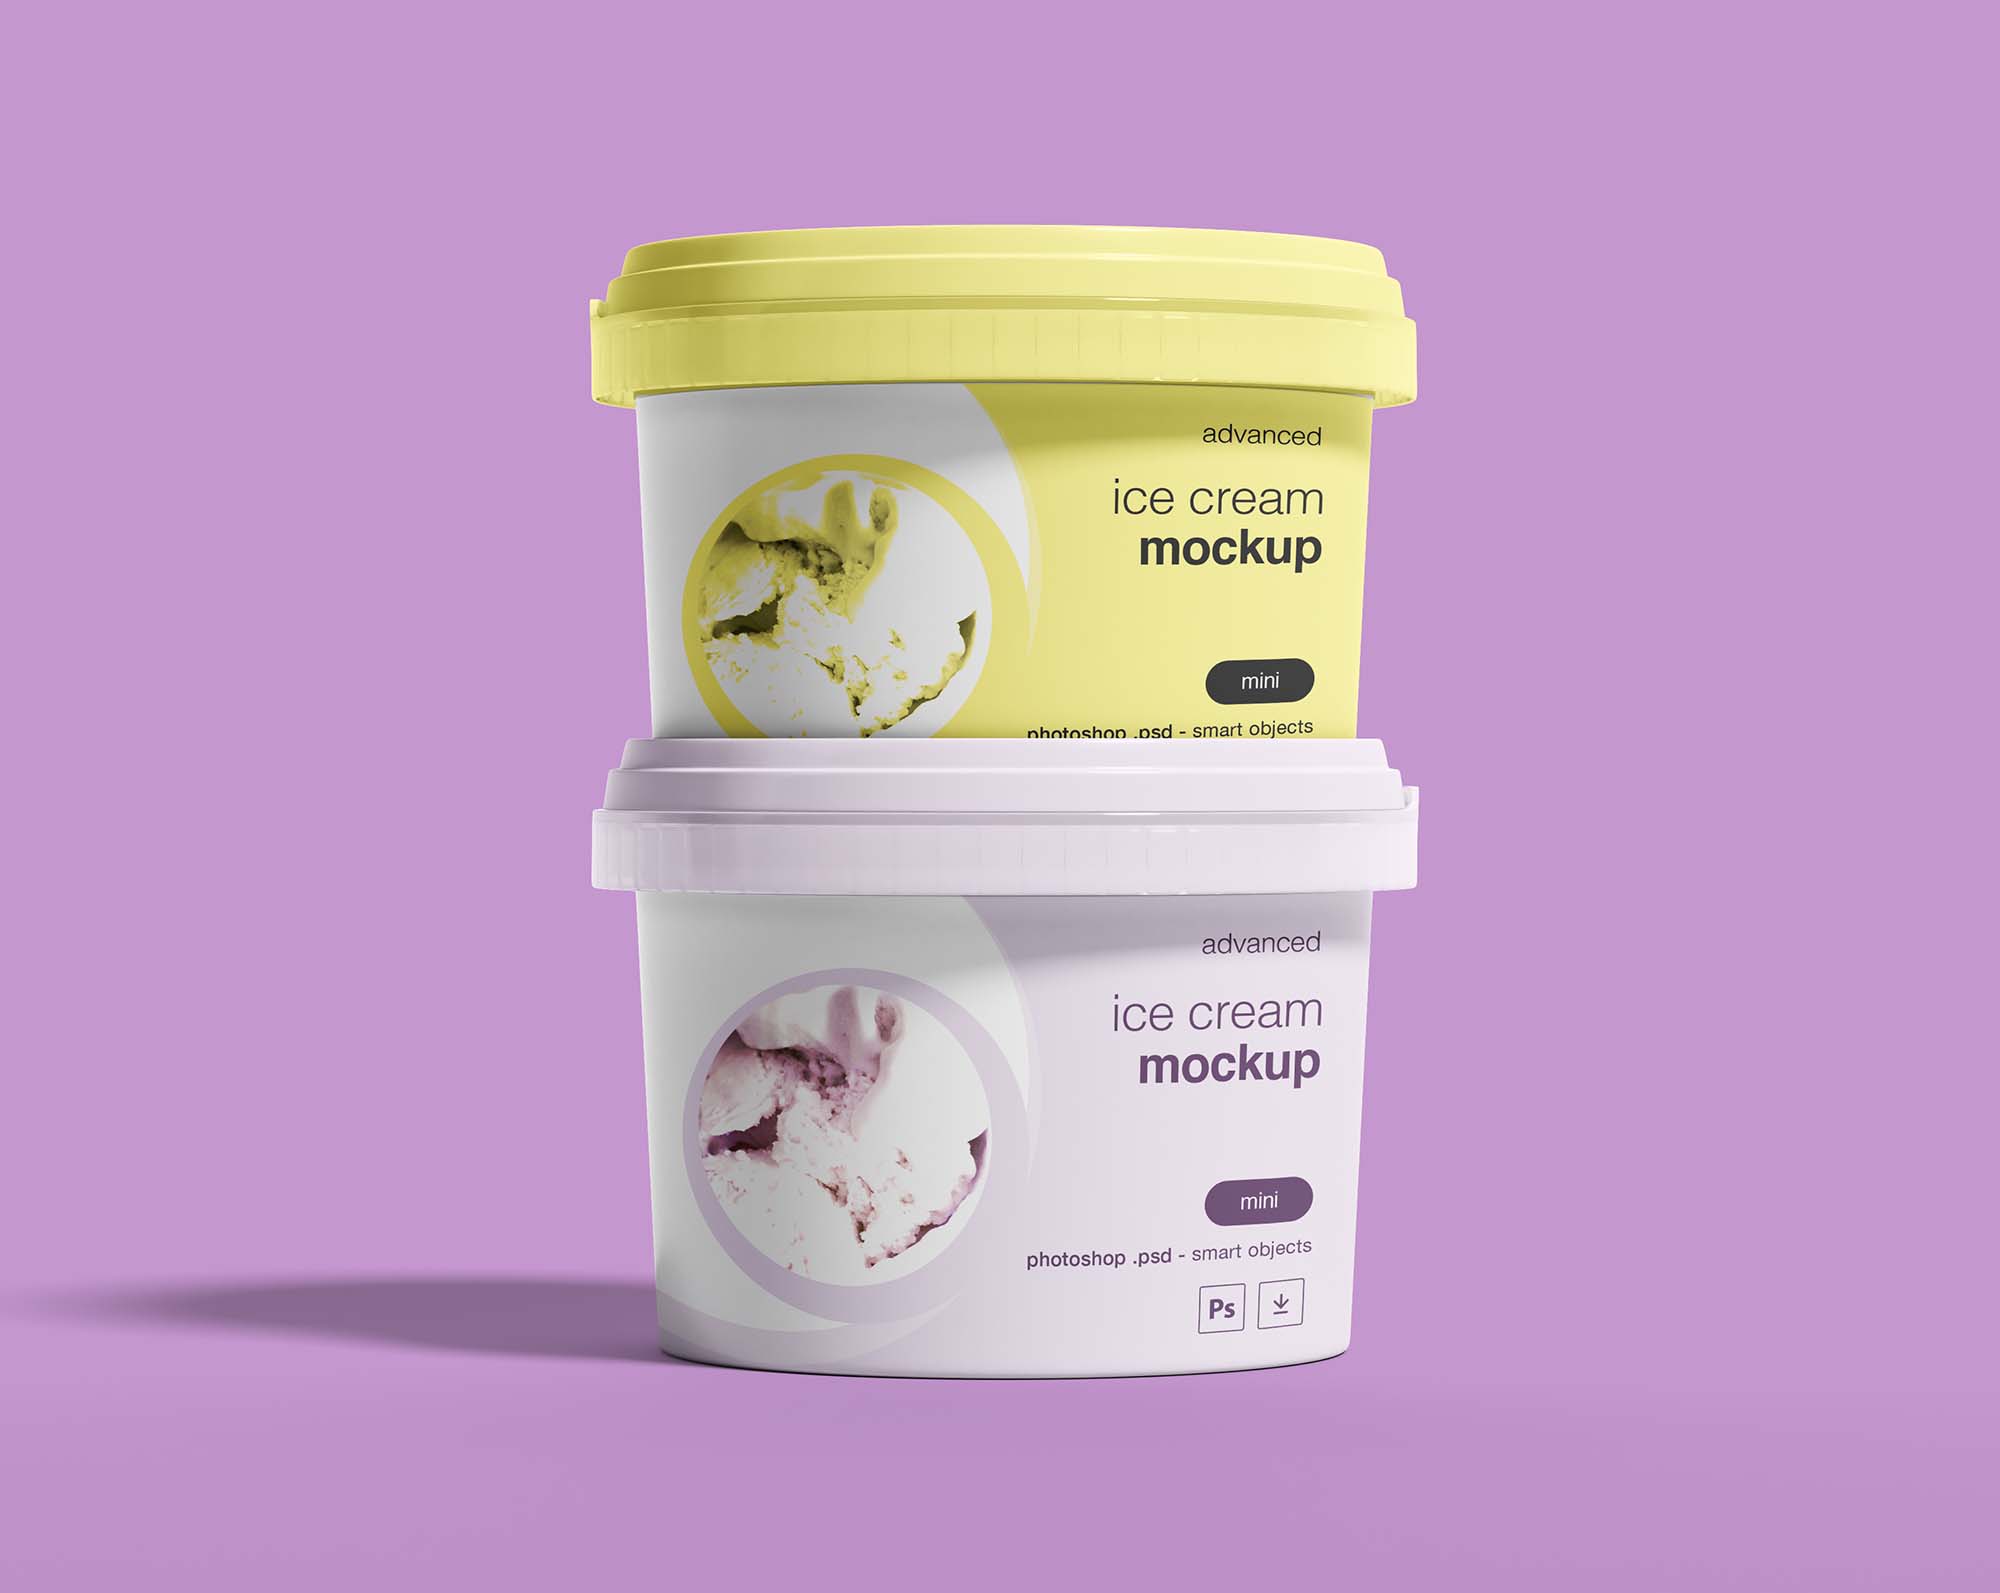 Free ice cream packaging mockup on pink background